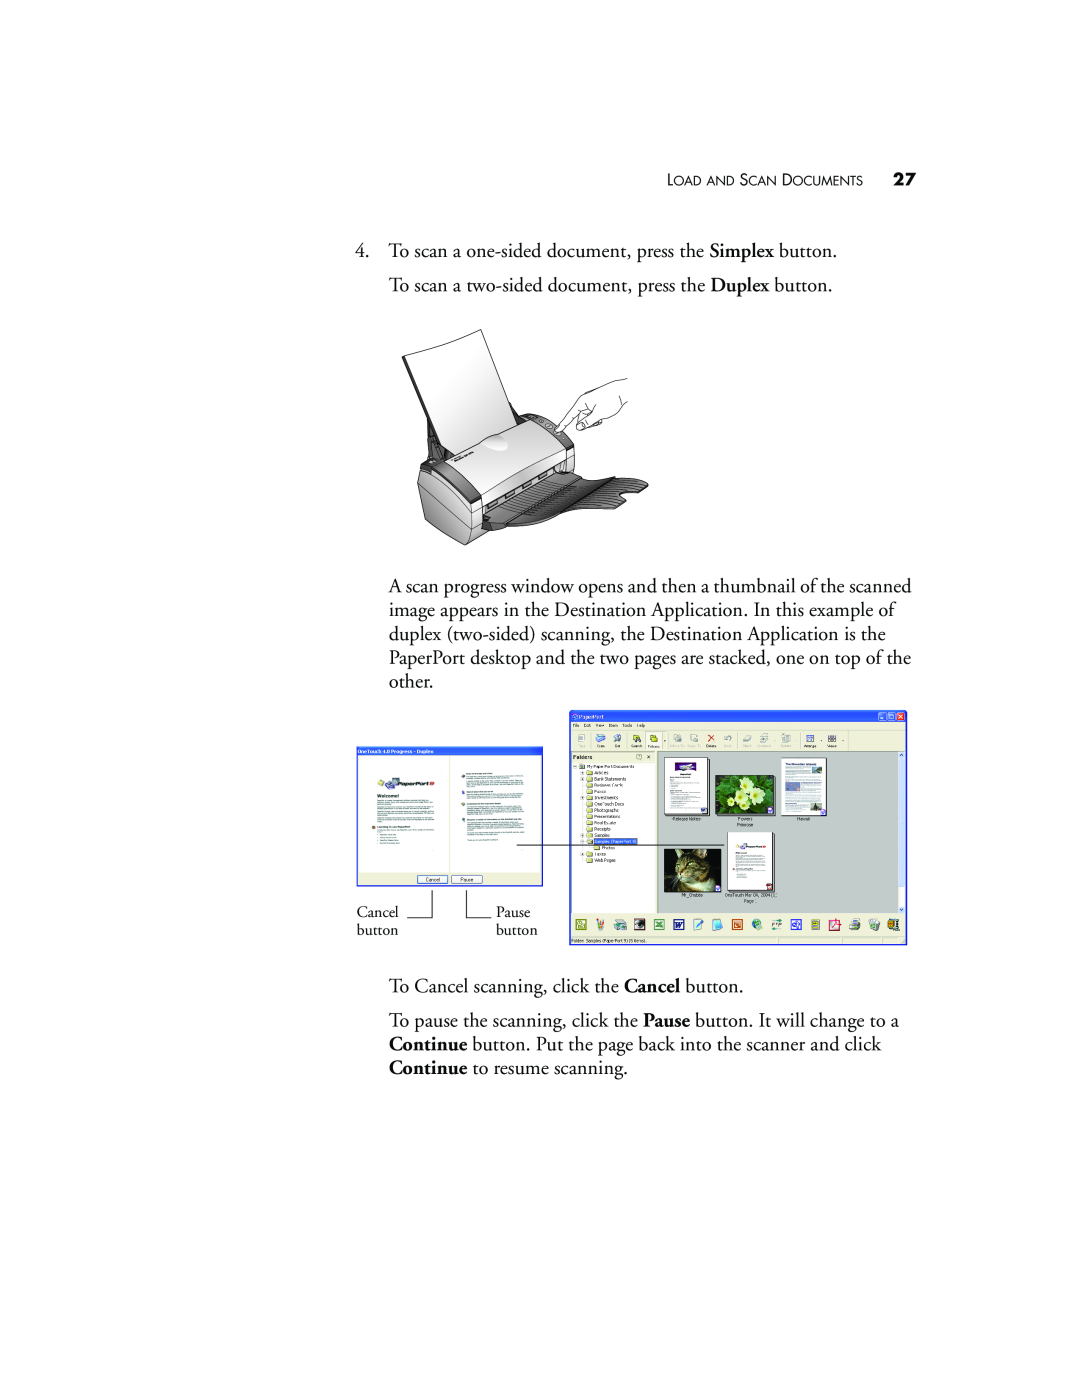 Visioneer XP 470 manual To Cancel scanning, click the Cancel button 